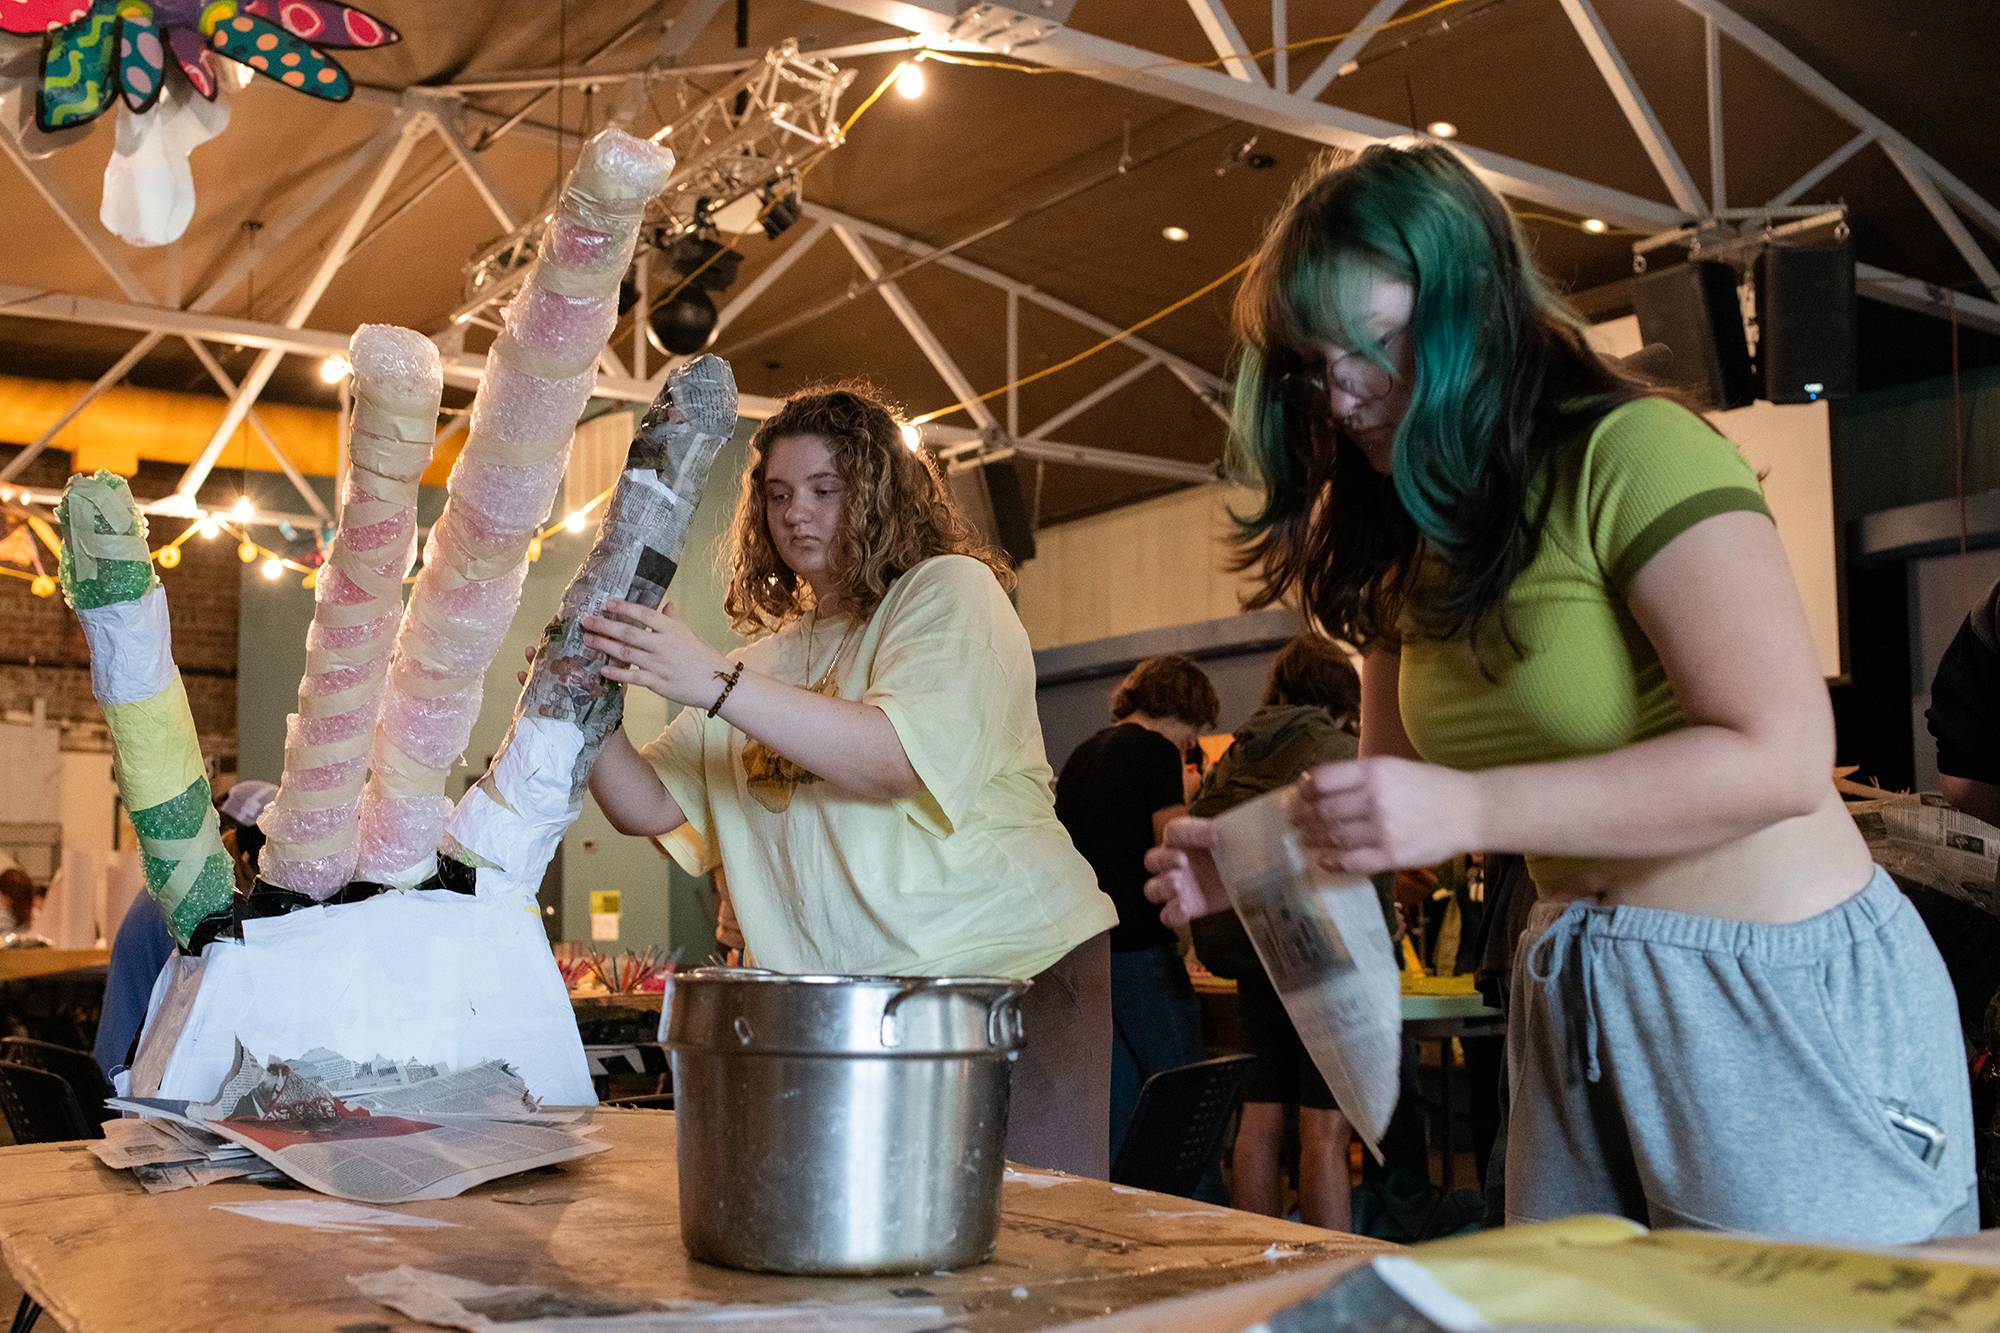 Members of an Ohio University learning community work together at the Central Venue to create paper mache pieces for a costume to be worn in the Honey for the Heart parade in Athens, Ohio.